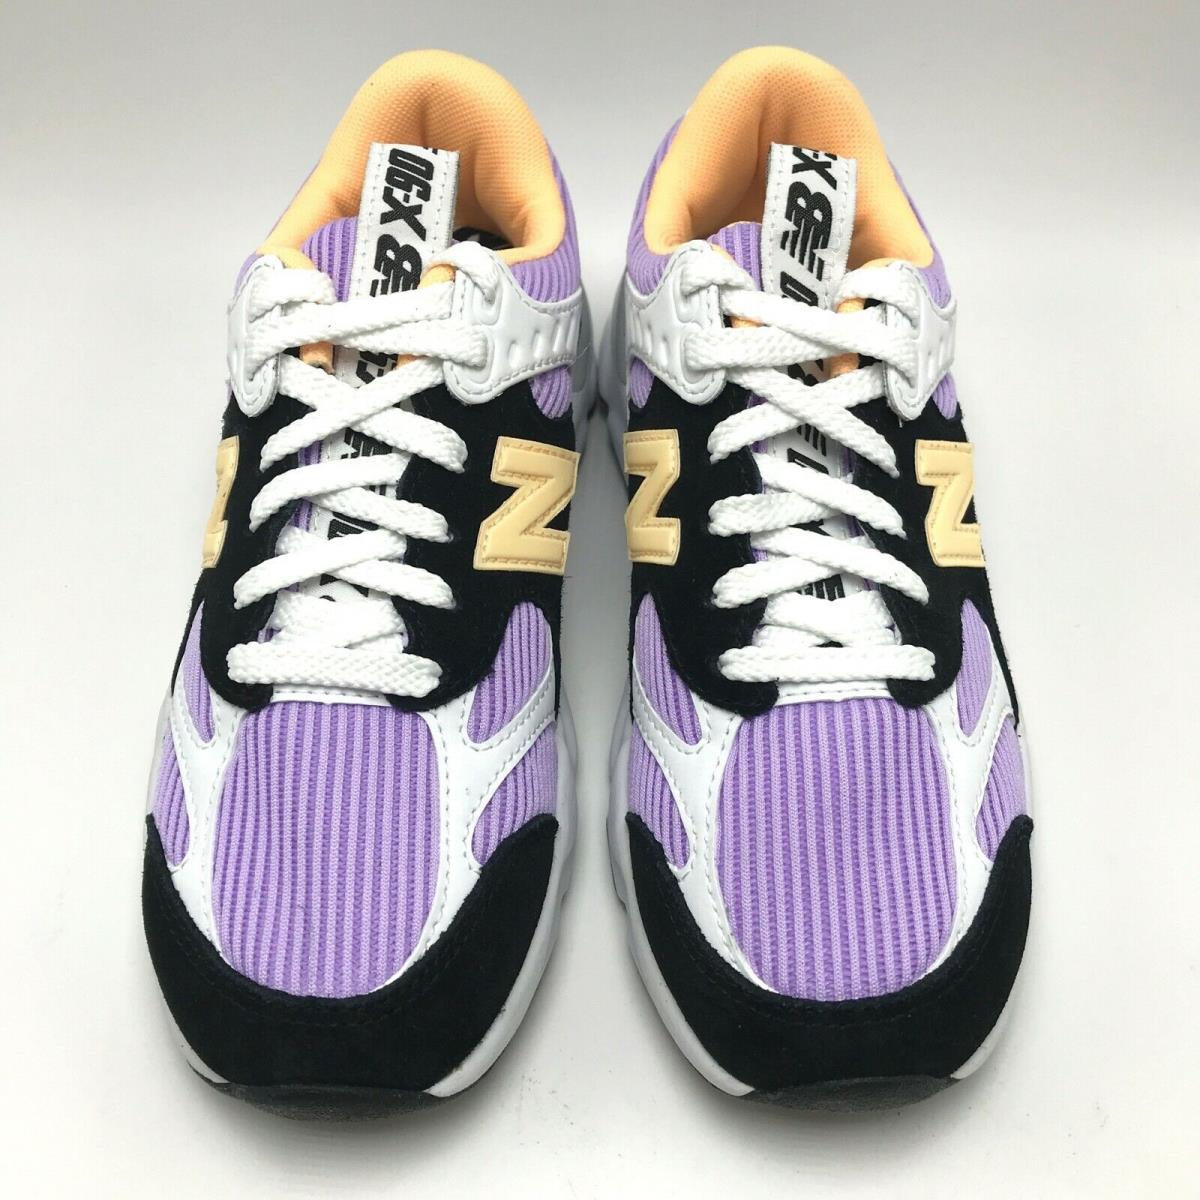 New Balance shoes  - Black with Dark Violet Glo 9